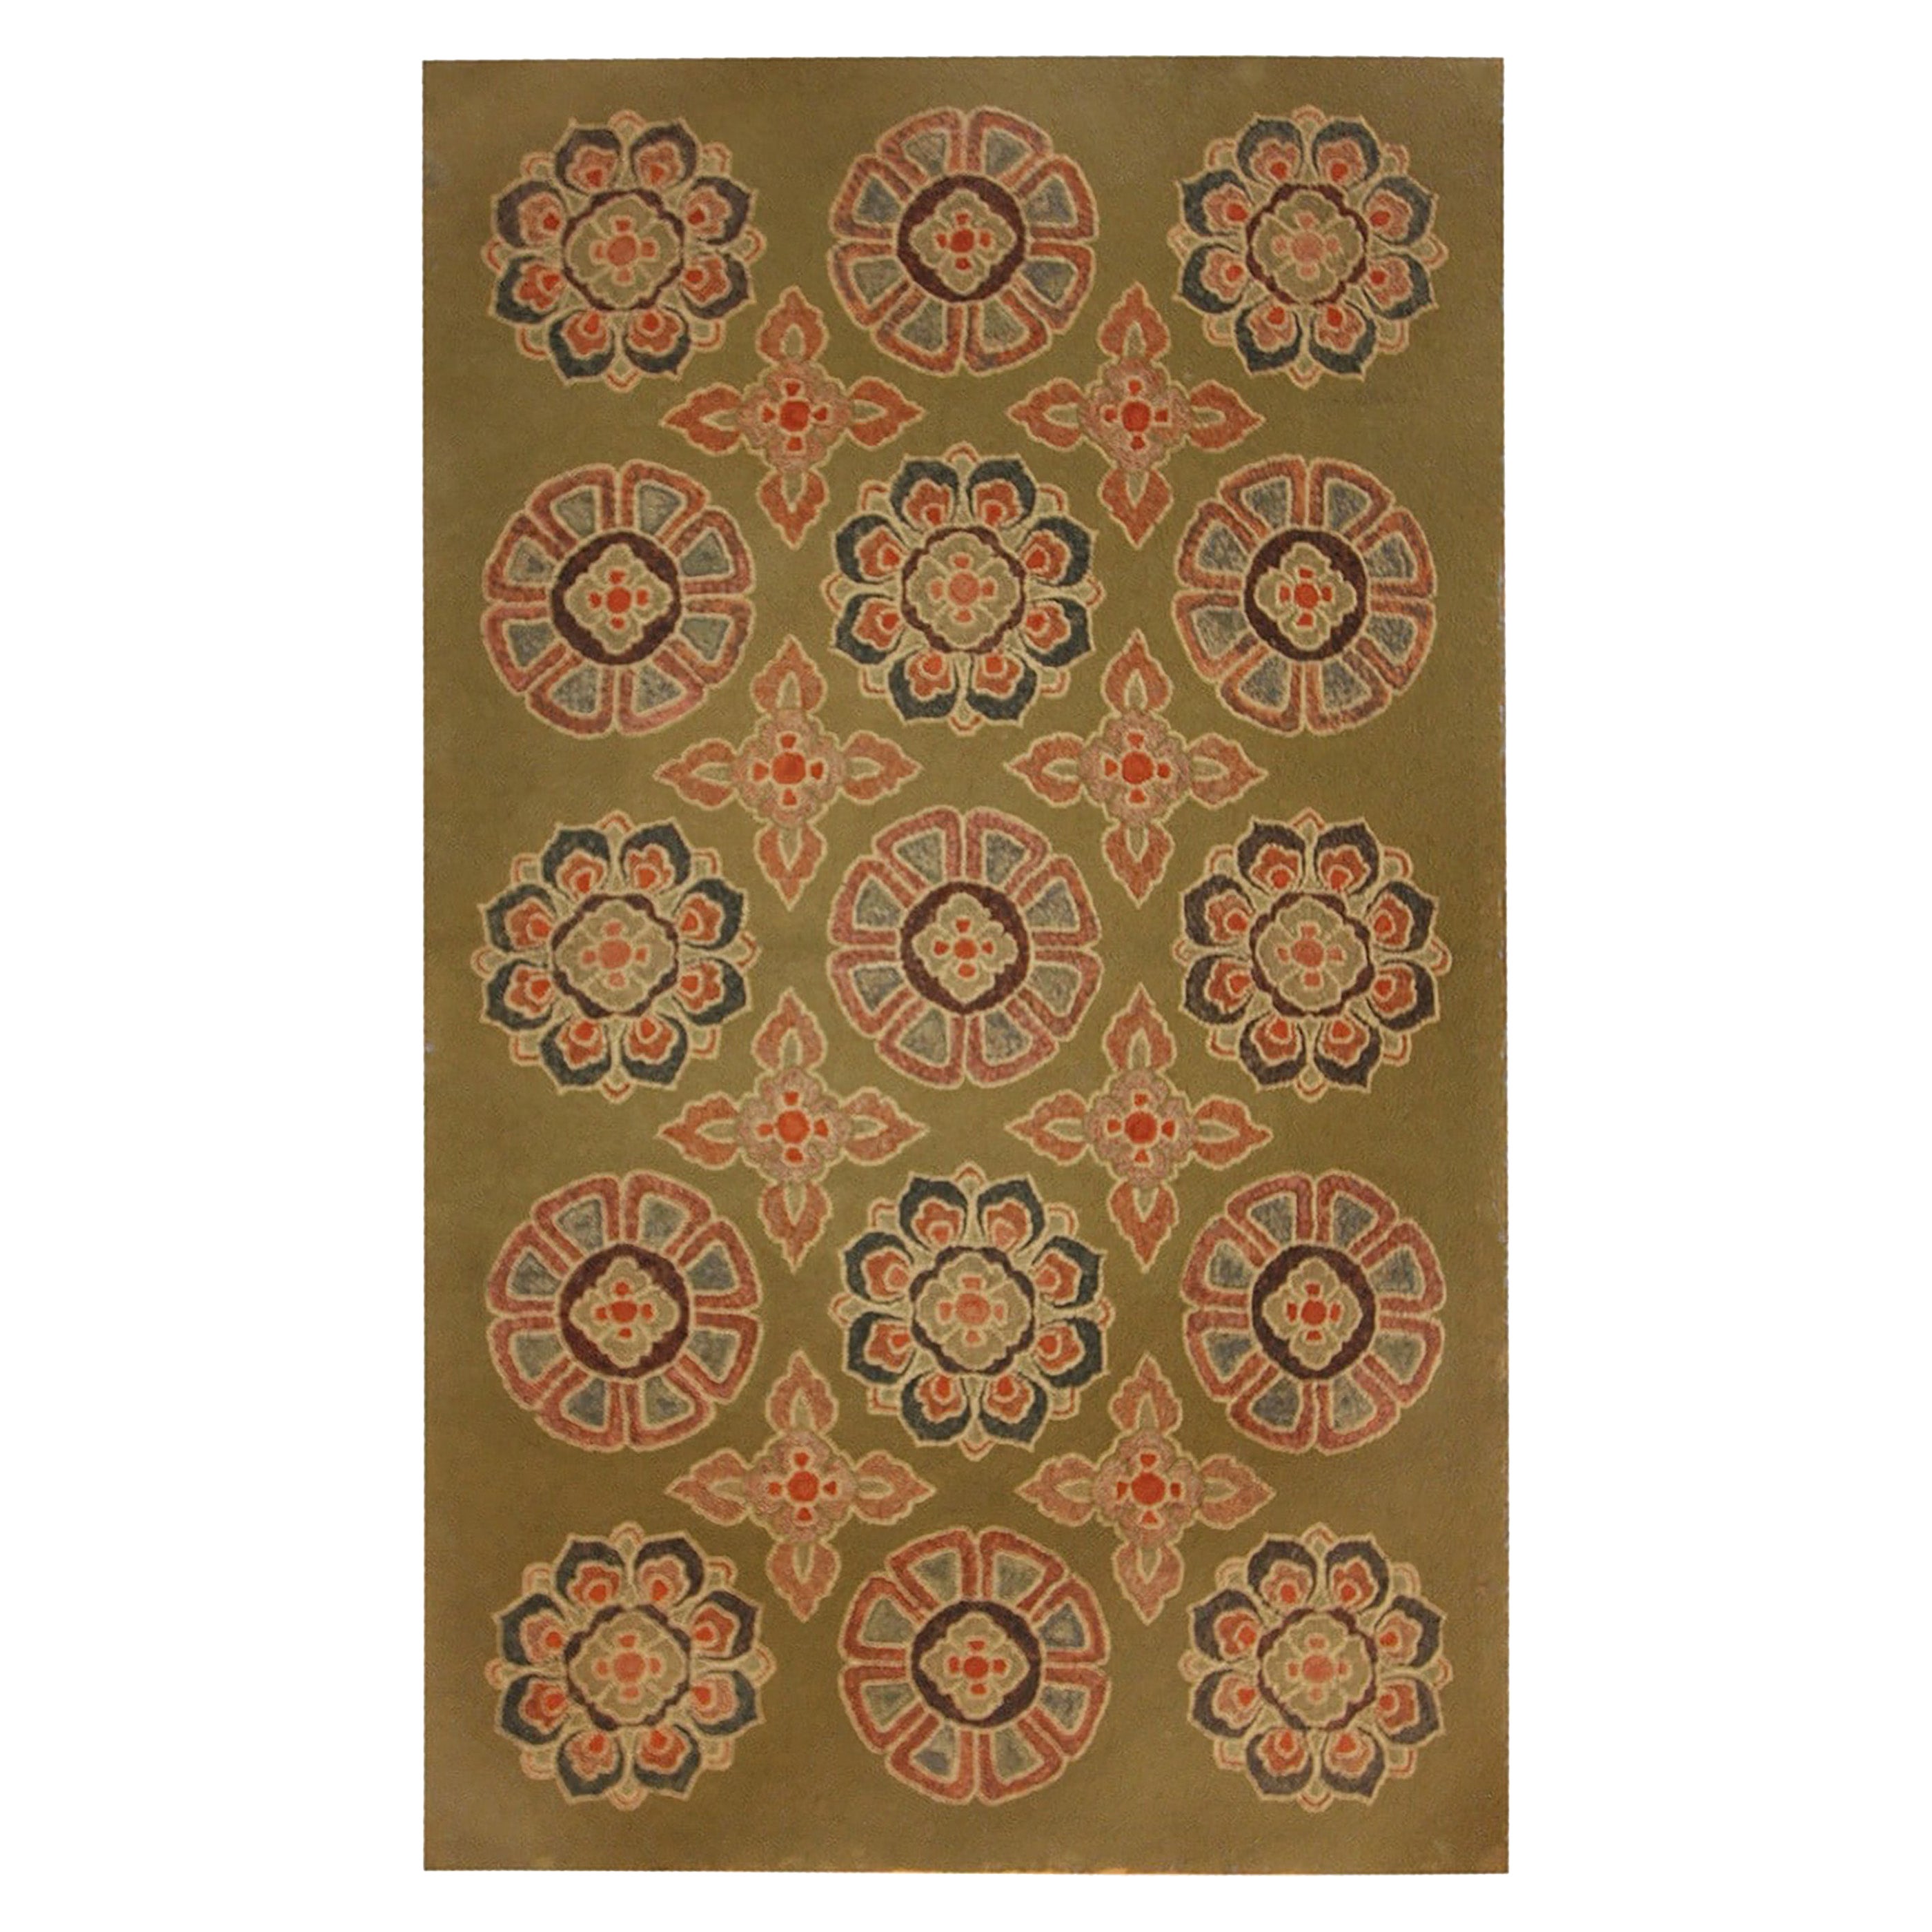 Beautiful American Antique Hooked Rug 2'11" x 4'10" For Sale